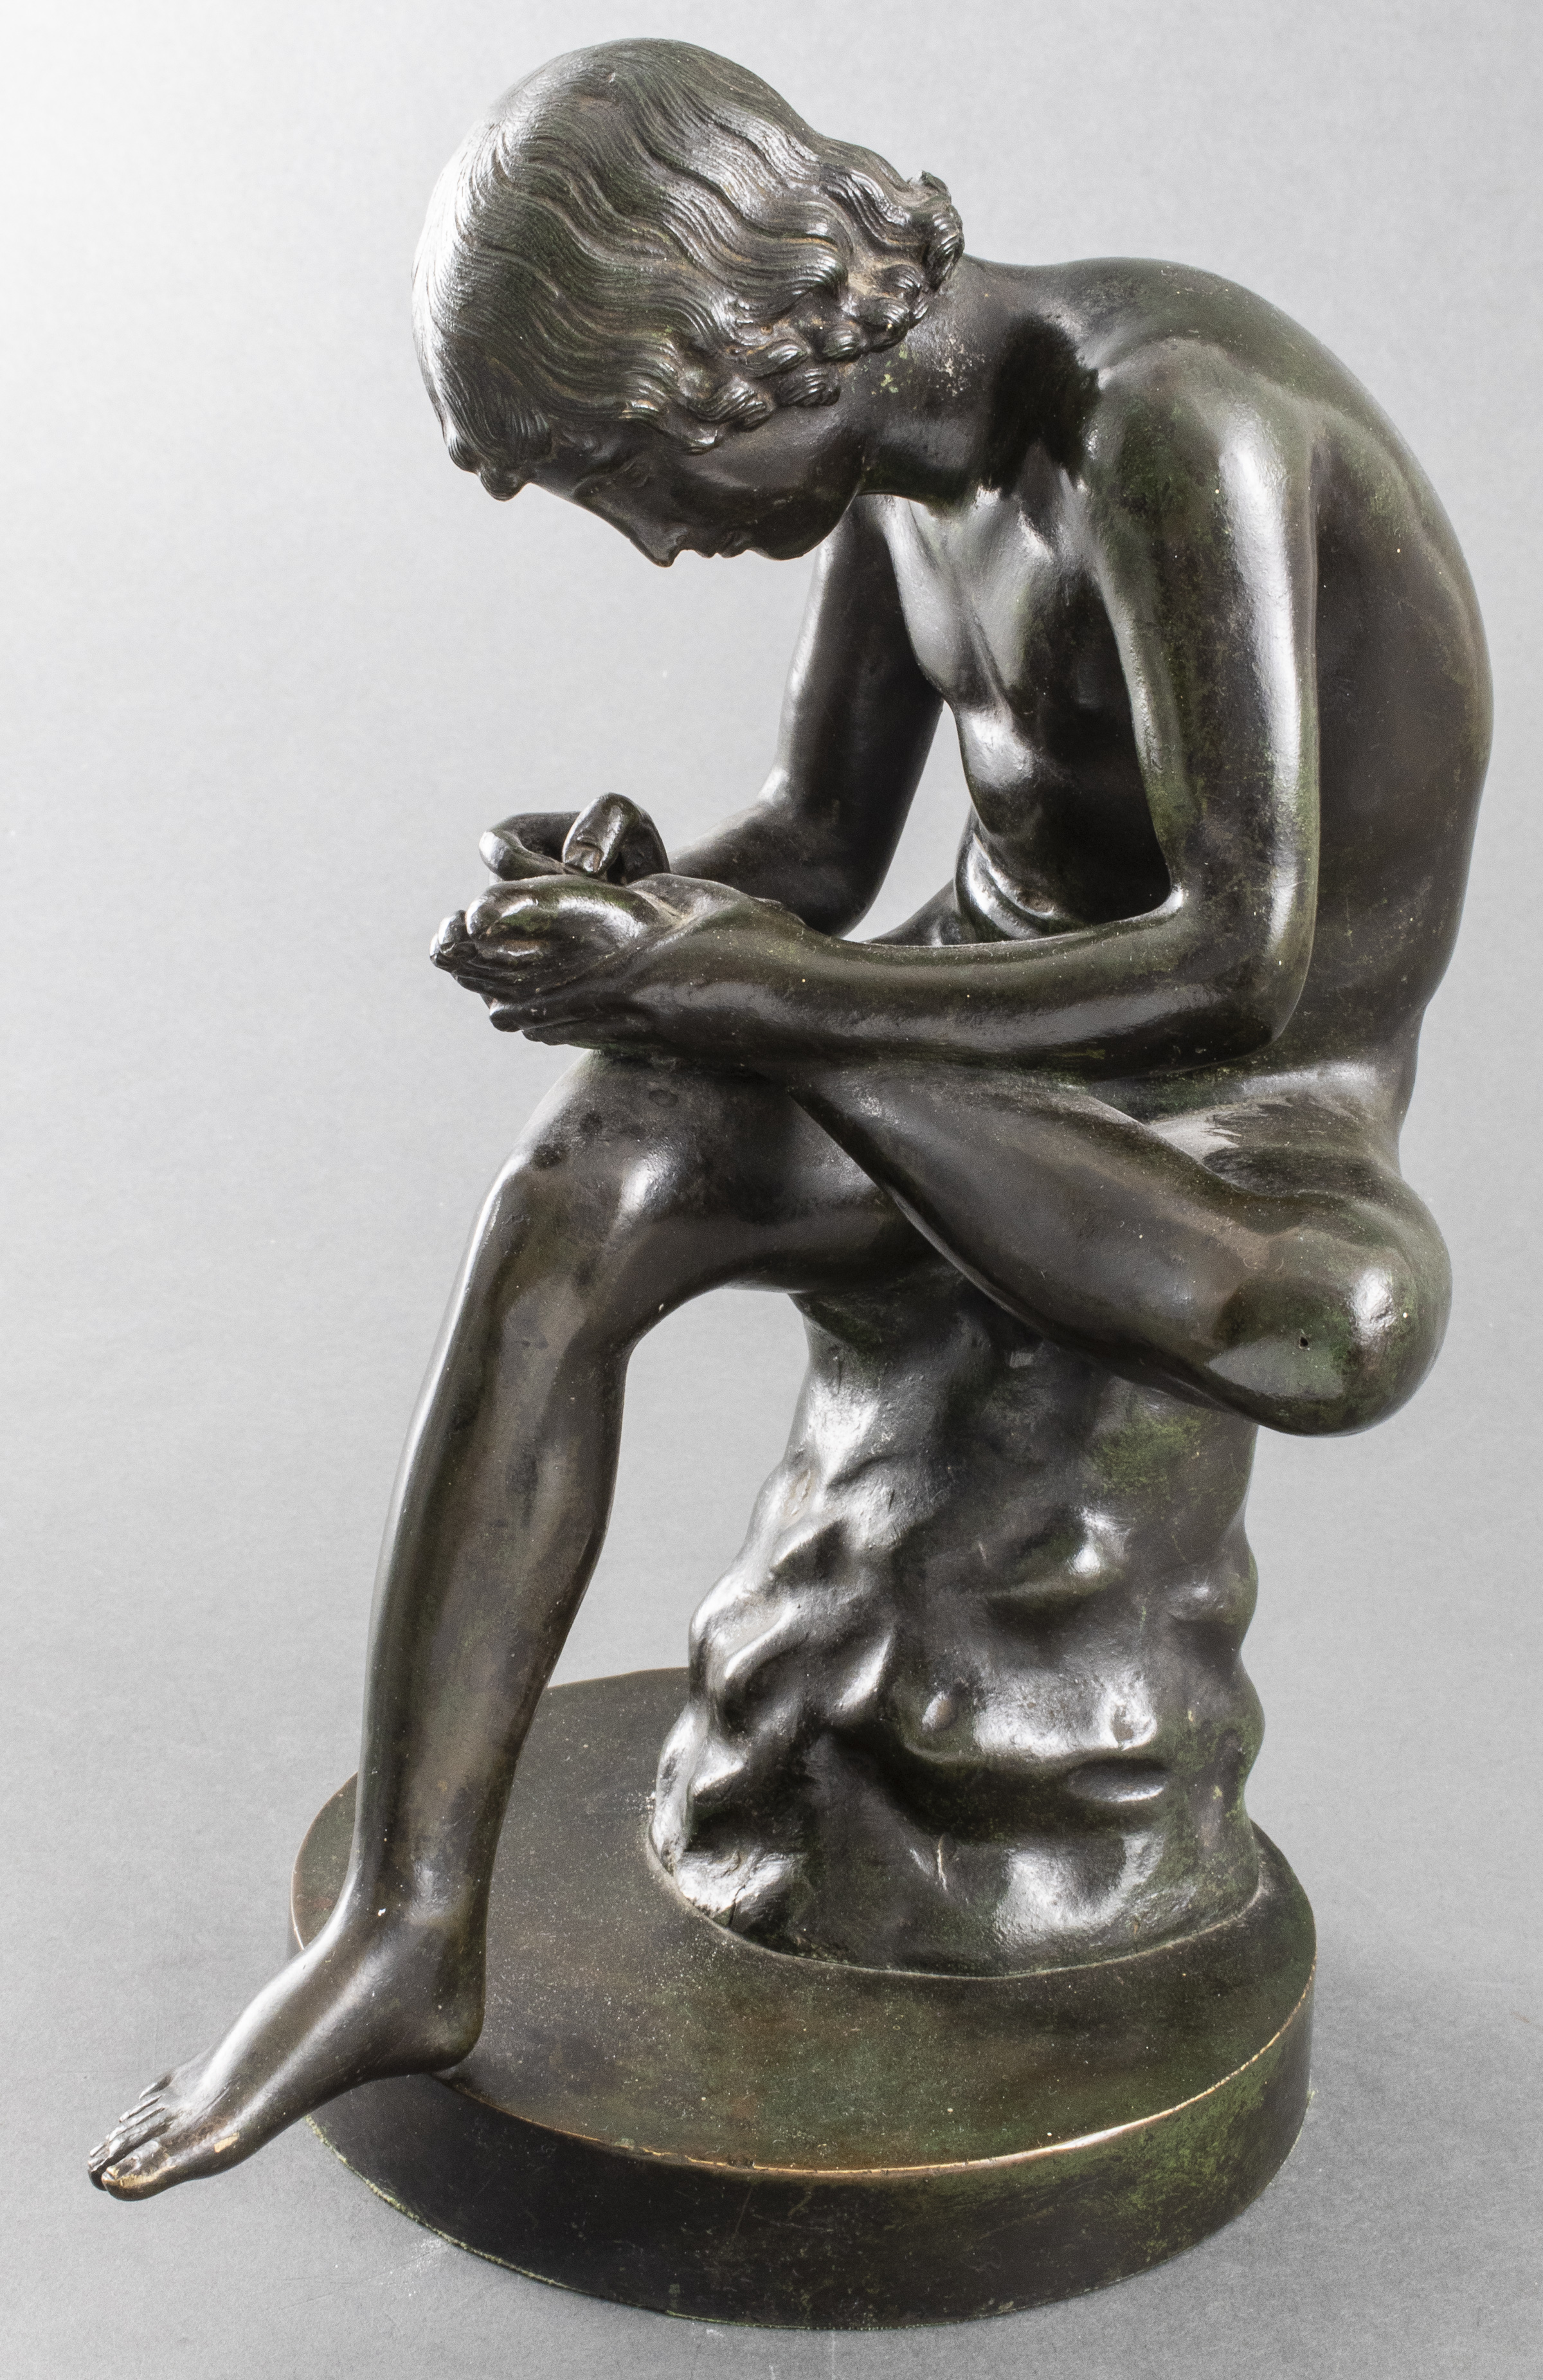 GRAND TOUR "BOY WITH THORN" BRONZE